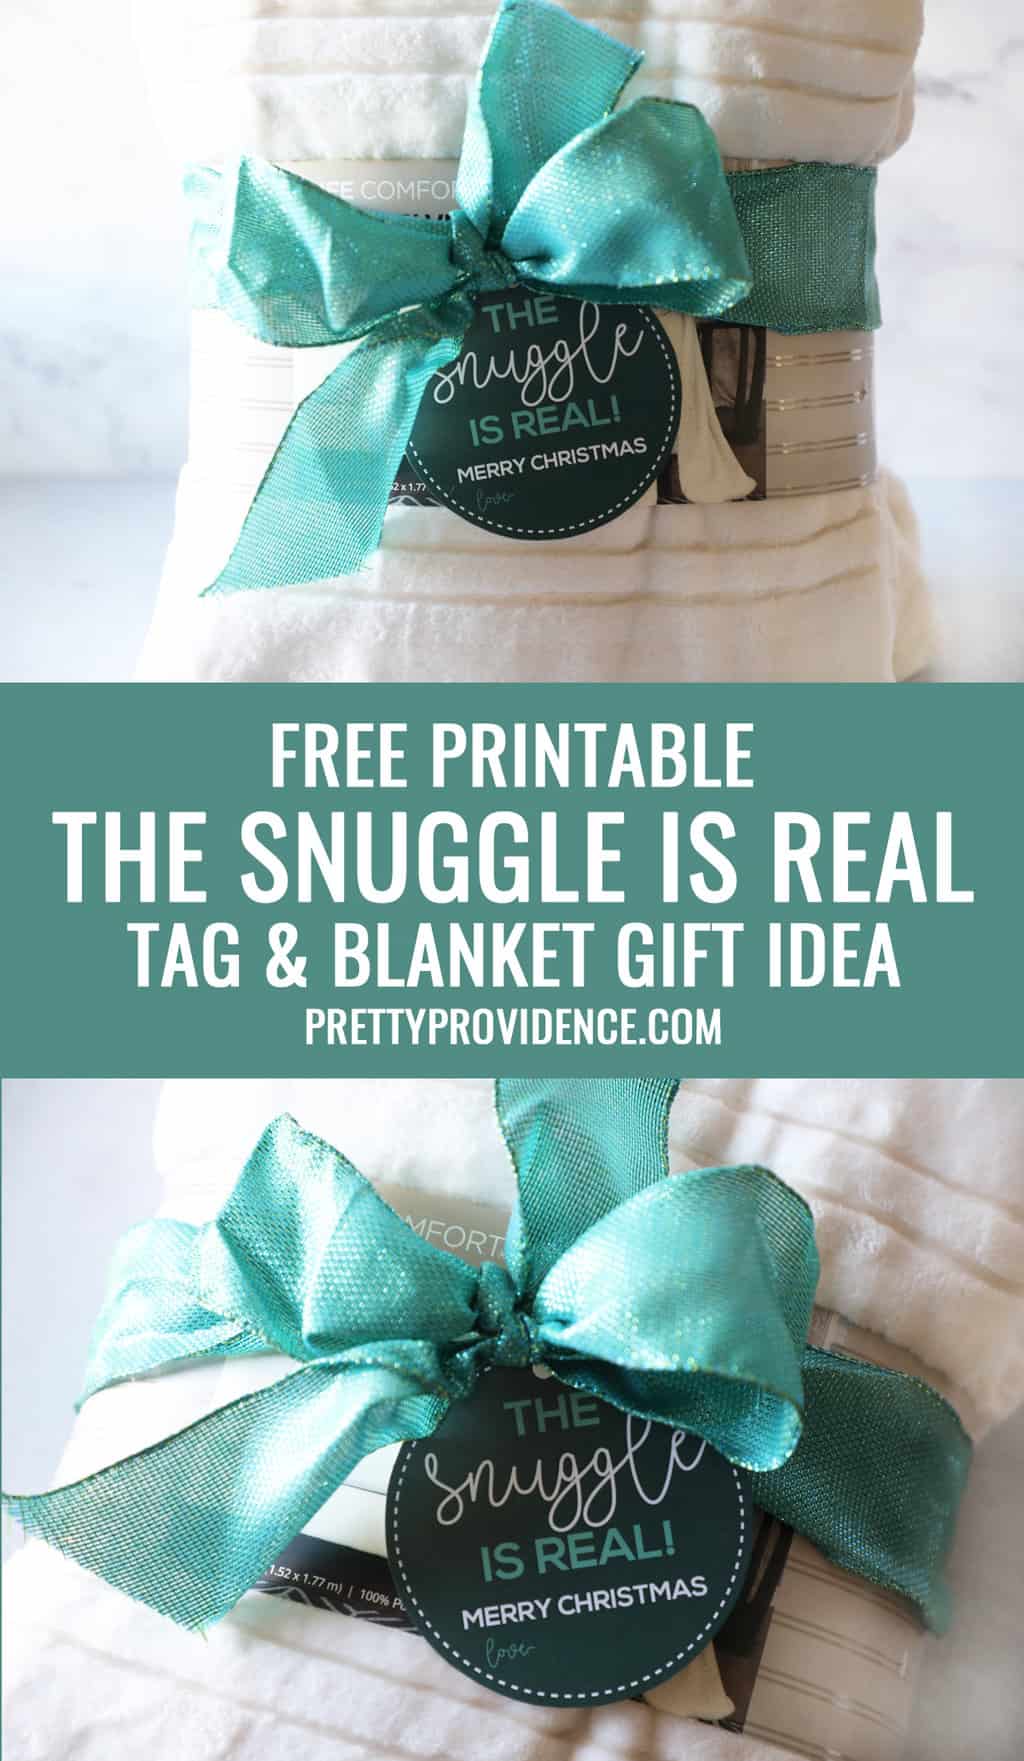 The Snuggle is Real Blanket Gift